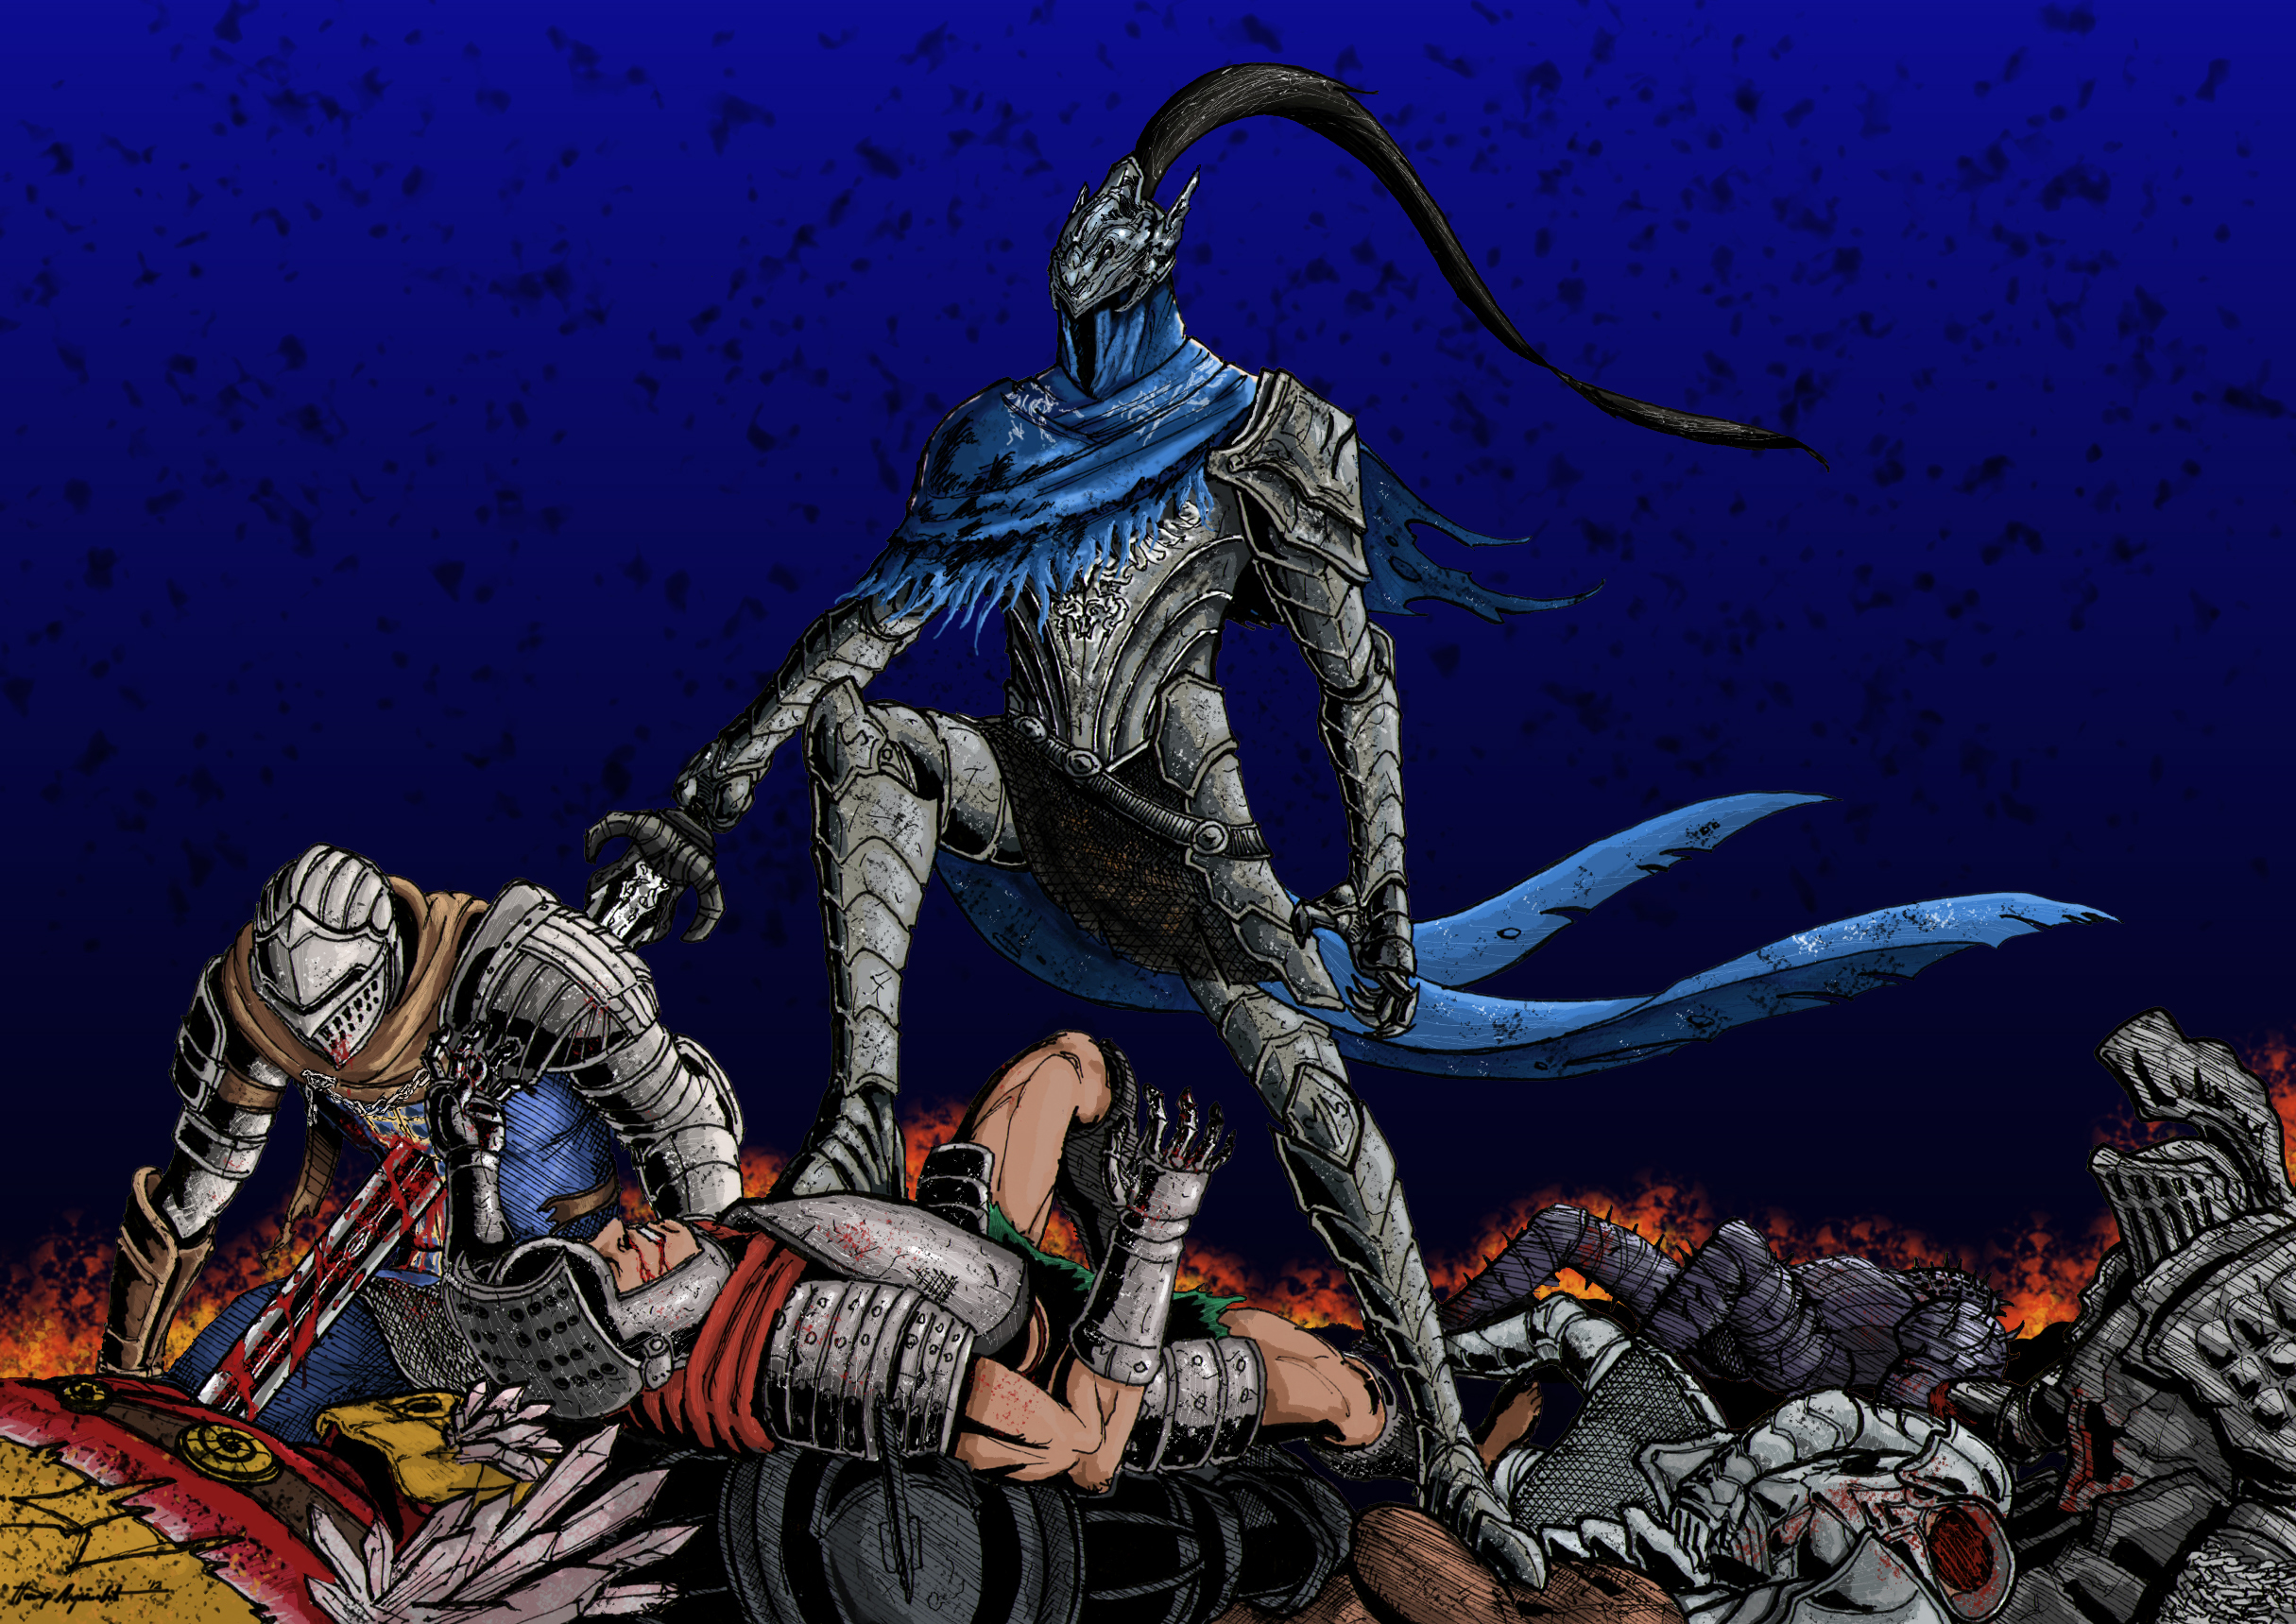 Some Artorias fan art (I didn't see if they were already posted). 